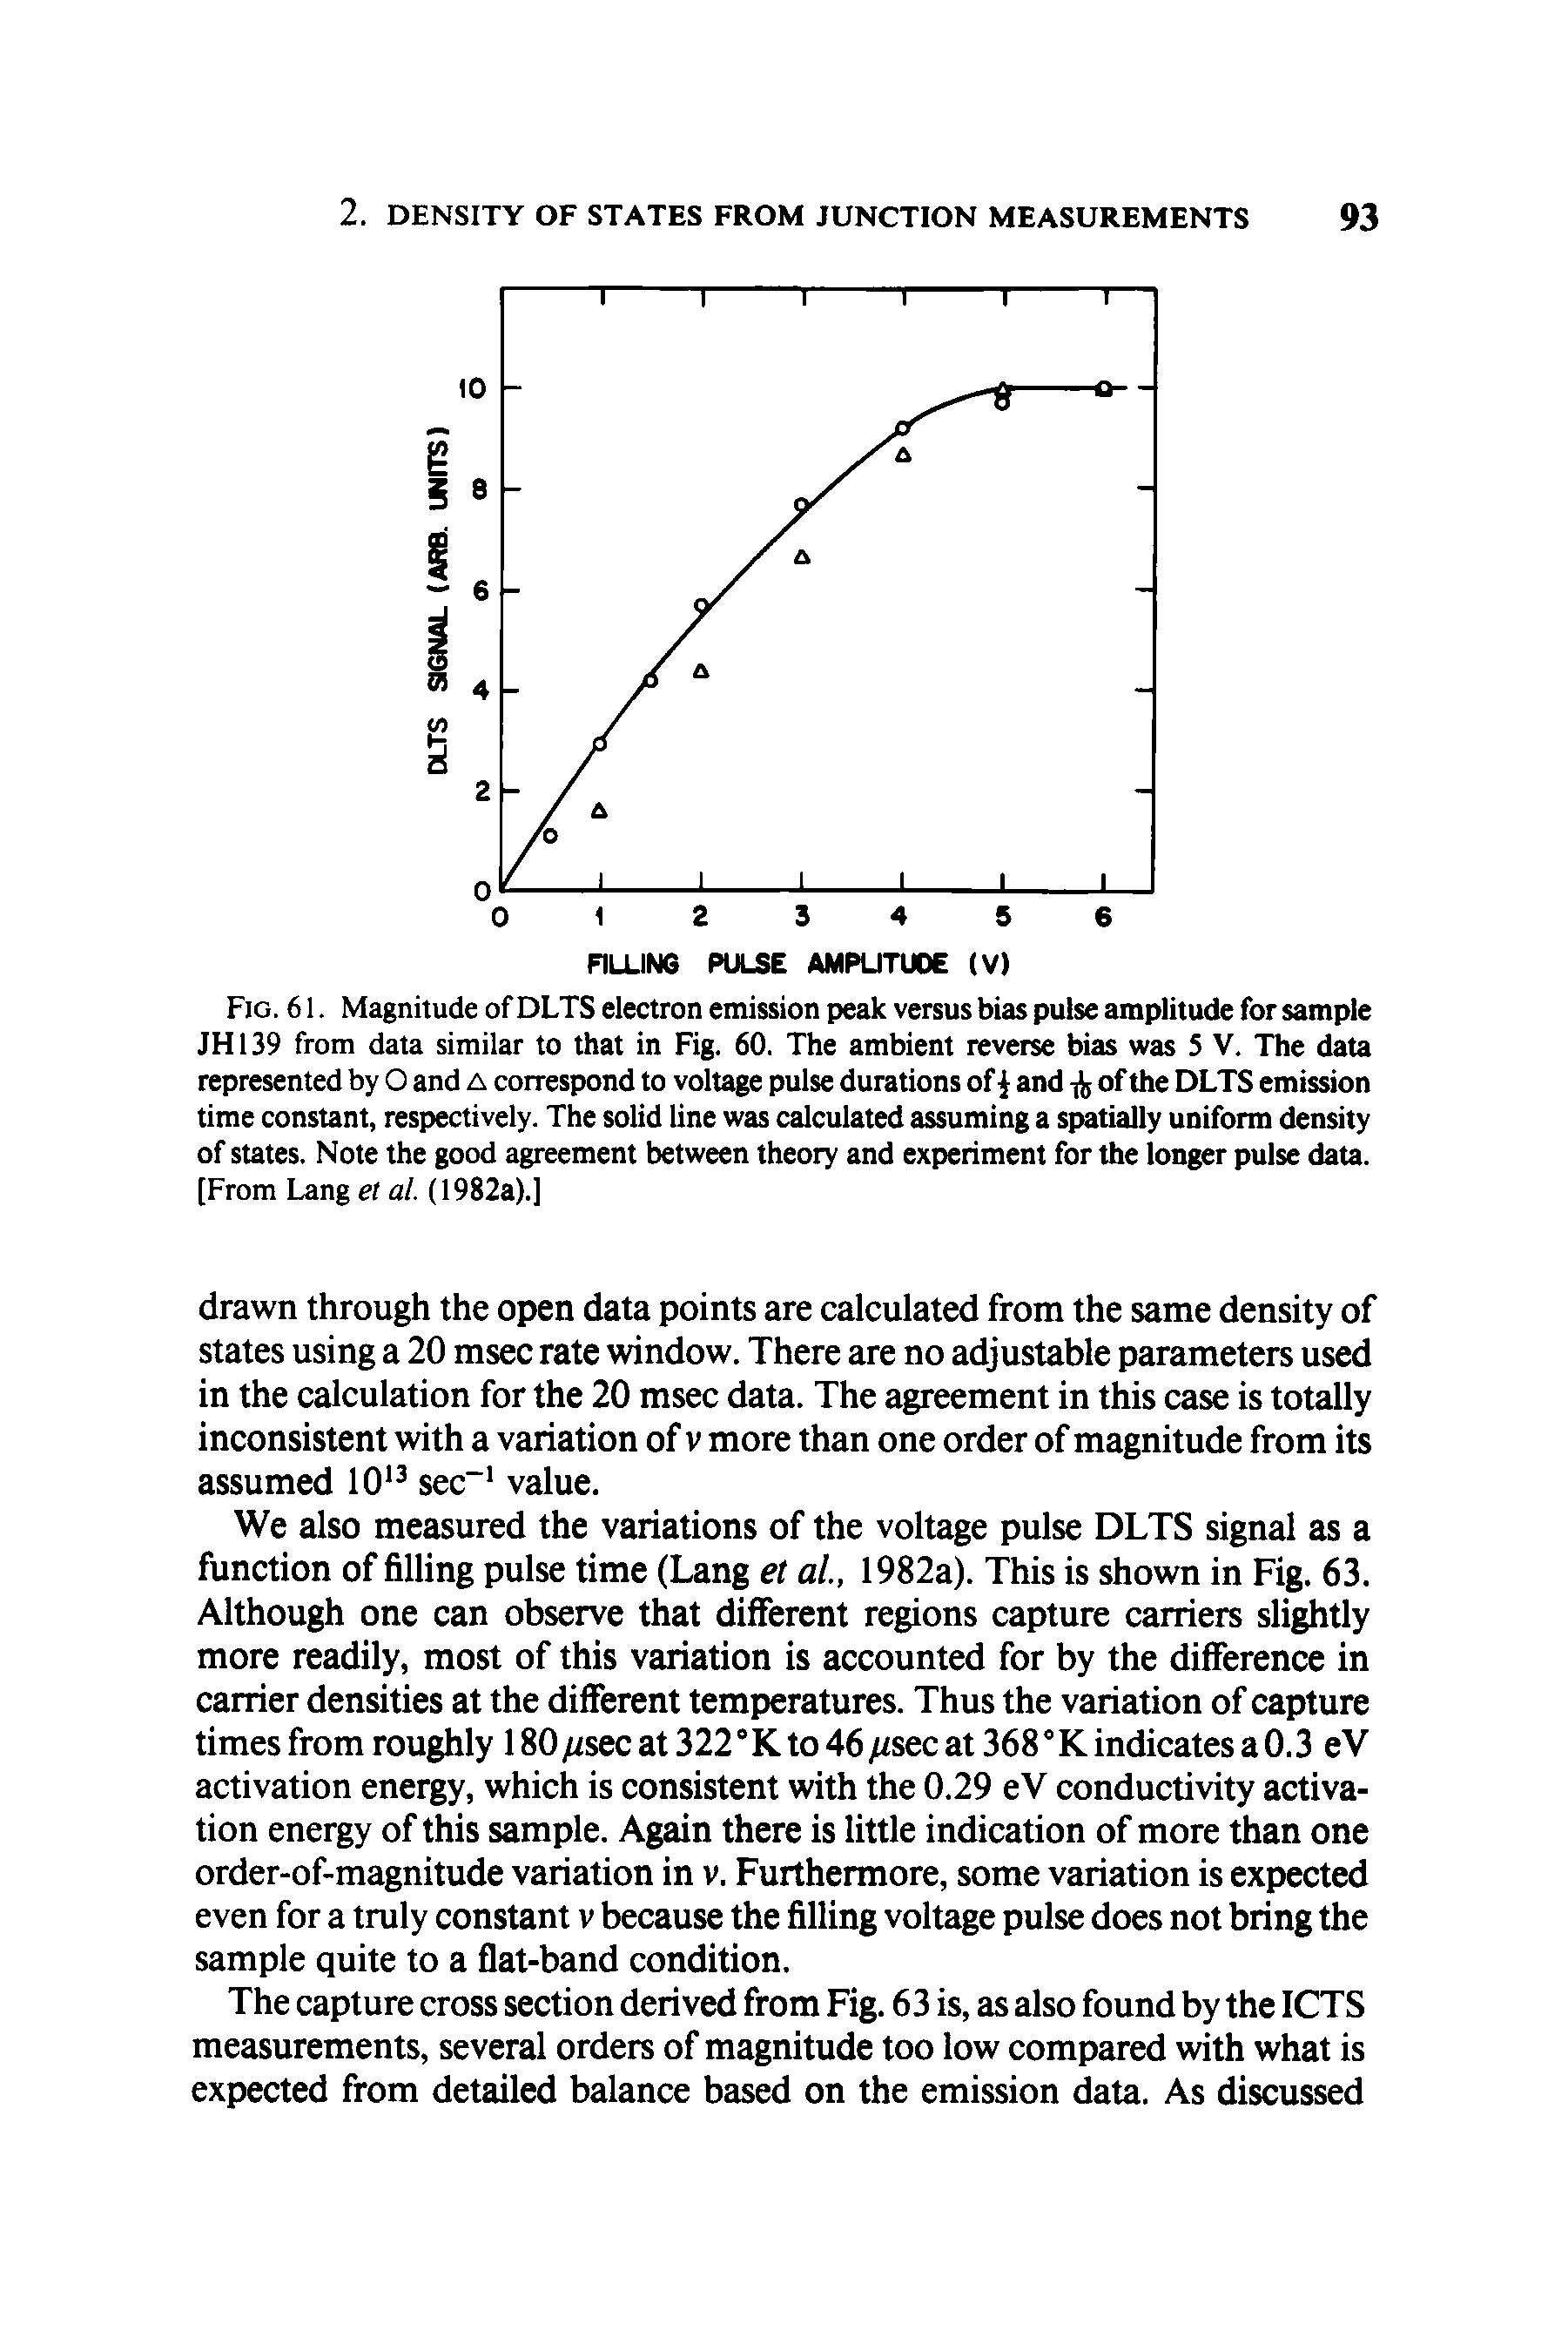 Fig. 61. Magnitude of DLTS electron emission peak versus bias pulse amplitude for sample JH139 from data similar to that in Fig. 60. The ambient reverse bias was 5 V. The data represented by O and a correspond to voltage pulse durations of i and of the DLTS emission time constant, respectively. The solid line was calculated assuming a spatially uniform density of states. Note the good agreement between theory and experiment for the longer pulse data. [From Lang et al. (1982a).]...